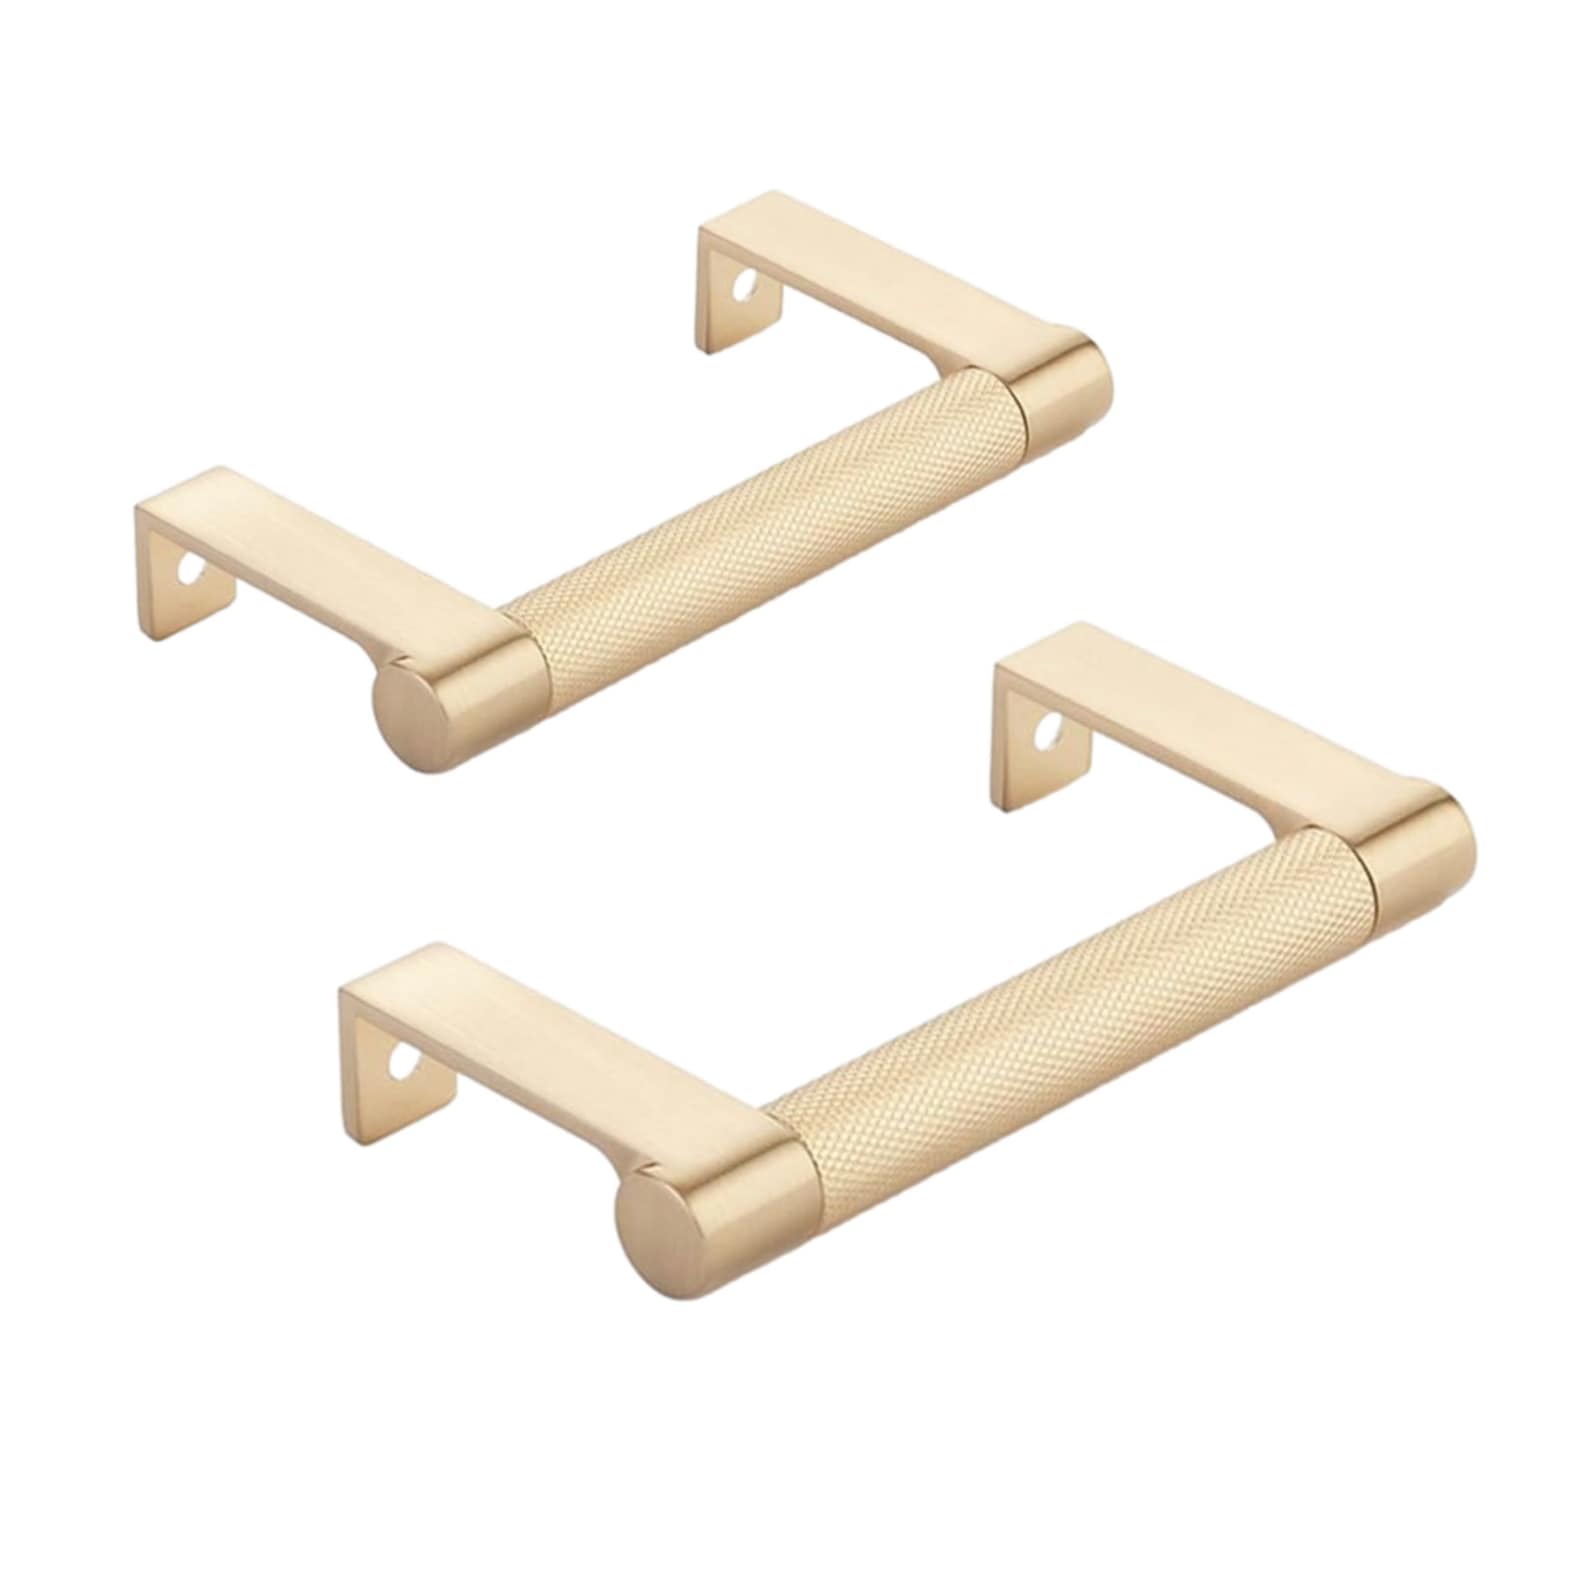 Champagne Bronze "Converse" Knurled Edge Tab Drawer Pulls - Industry Hardware